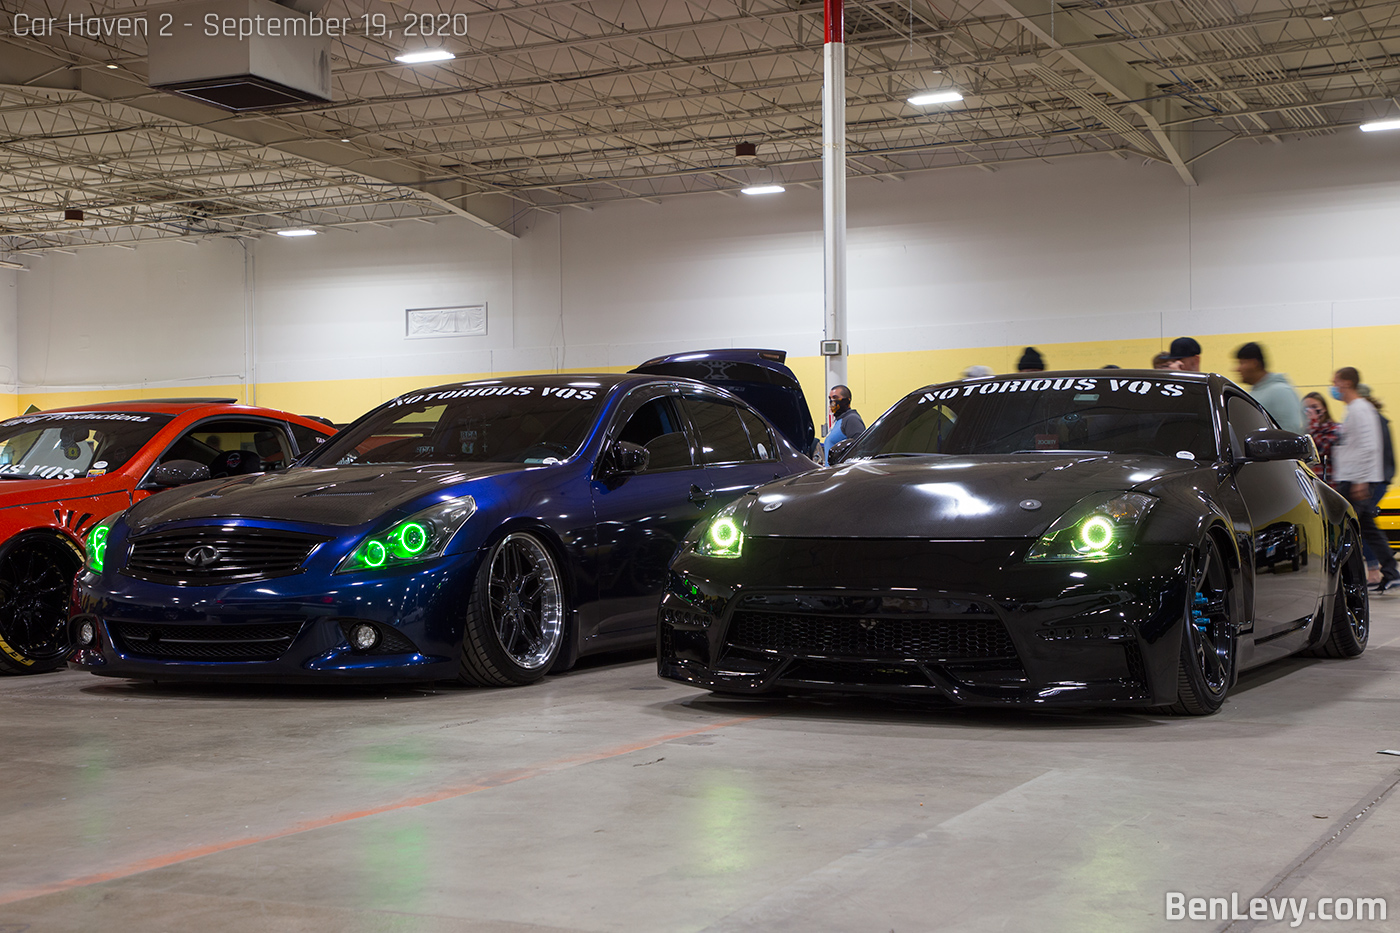 G37x and 350Z at Car Haven 2